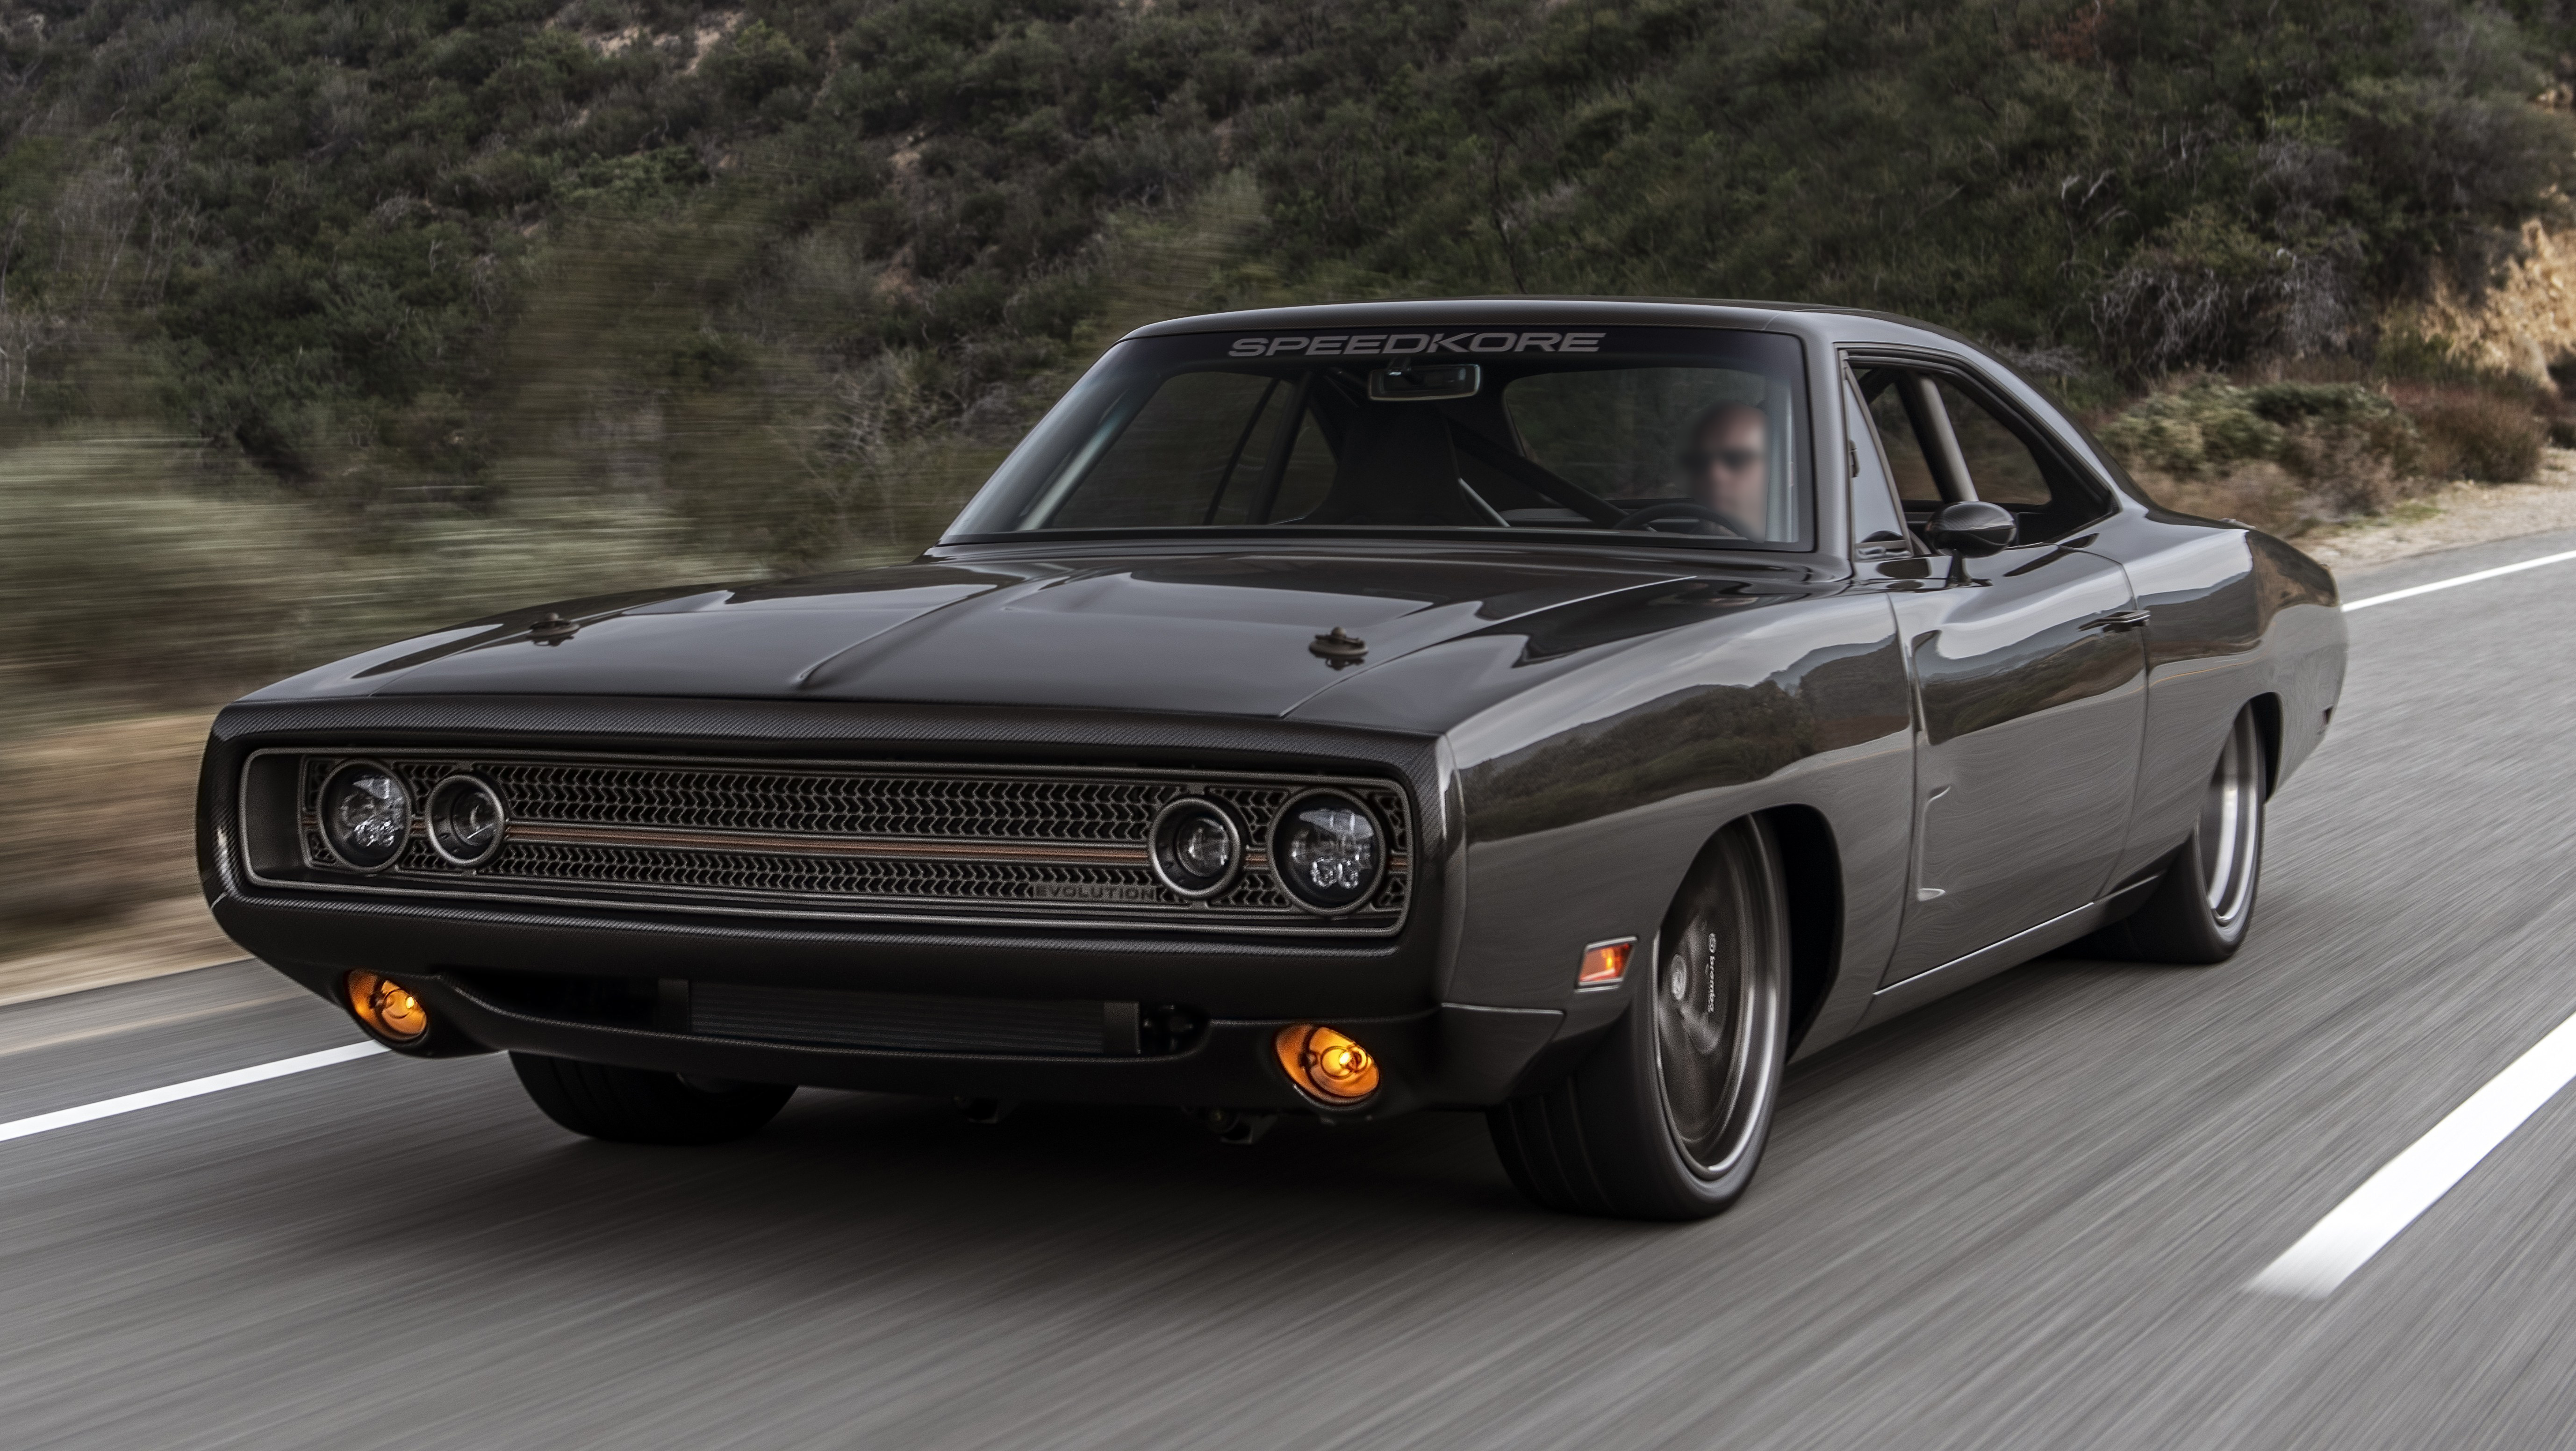 Awesome Dodge Charger Wallpapers 4K Free - Muscle Car